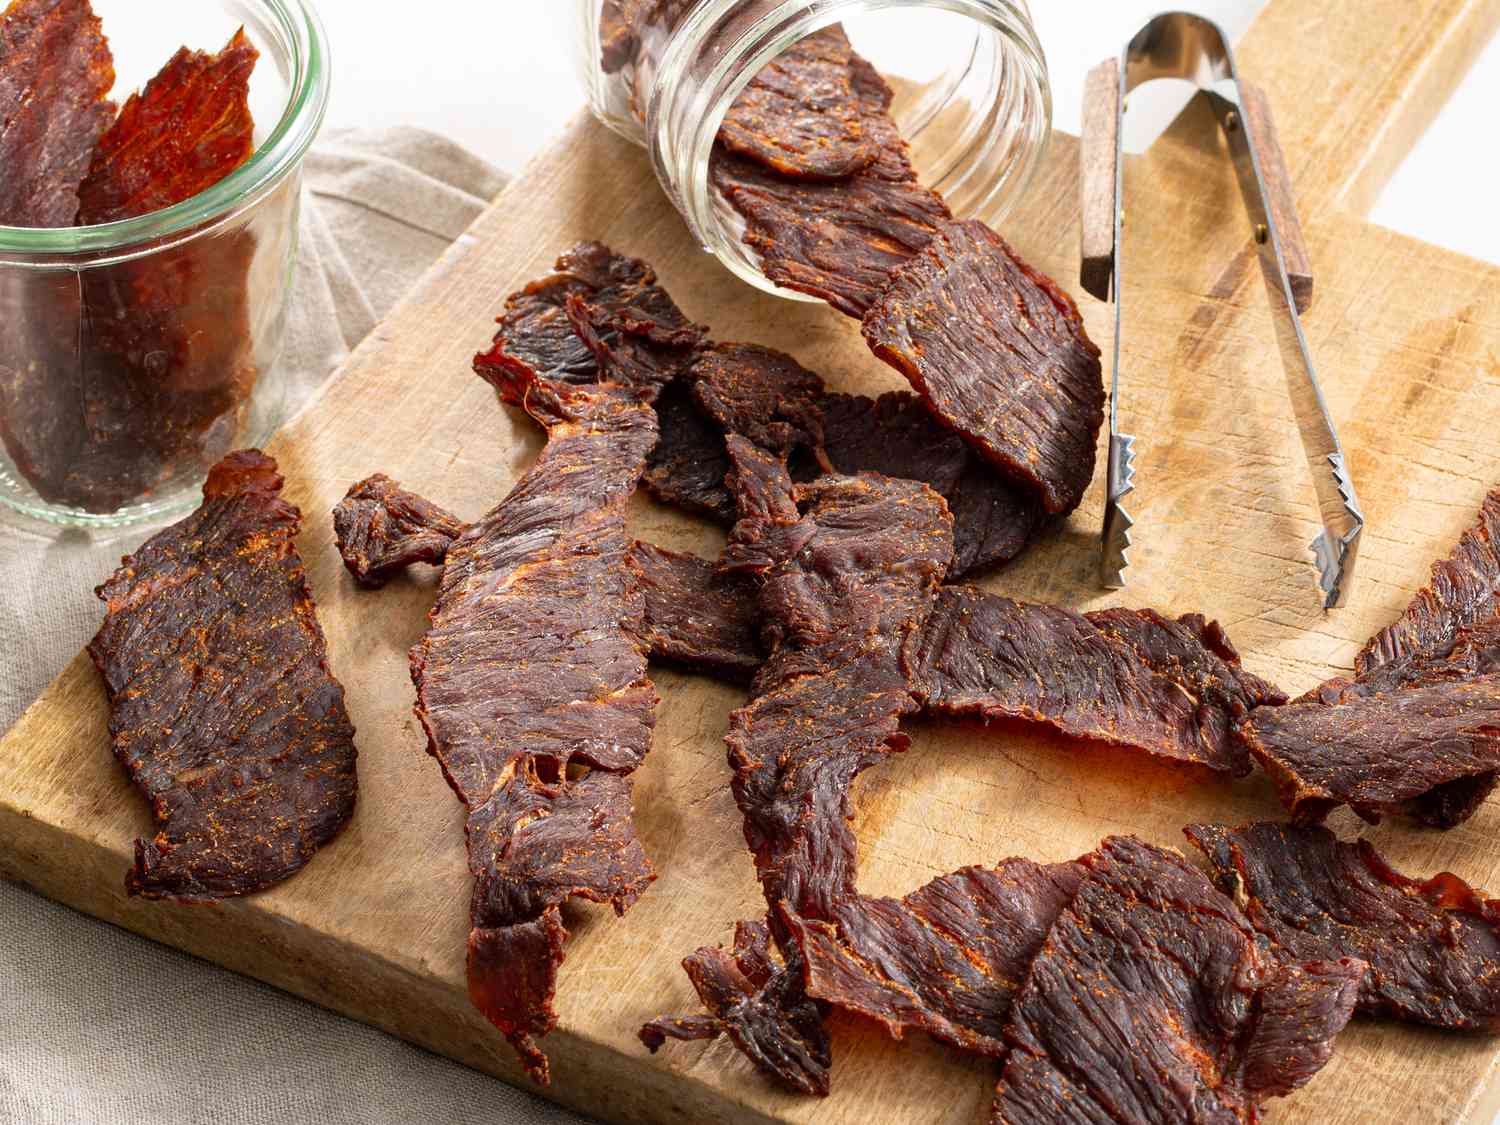 What Temperature Should You Dehydrate Jerky At?